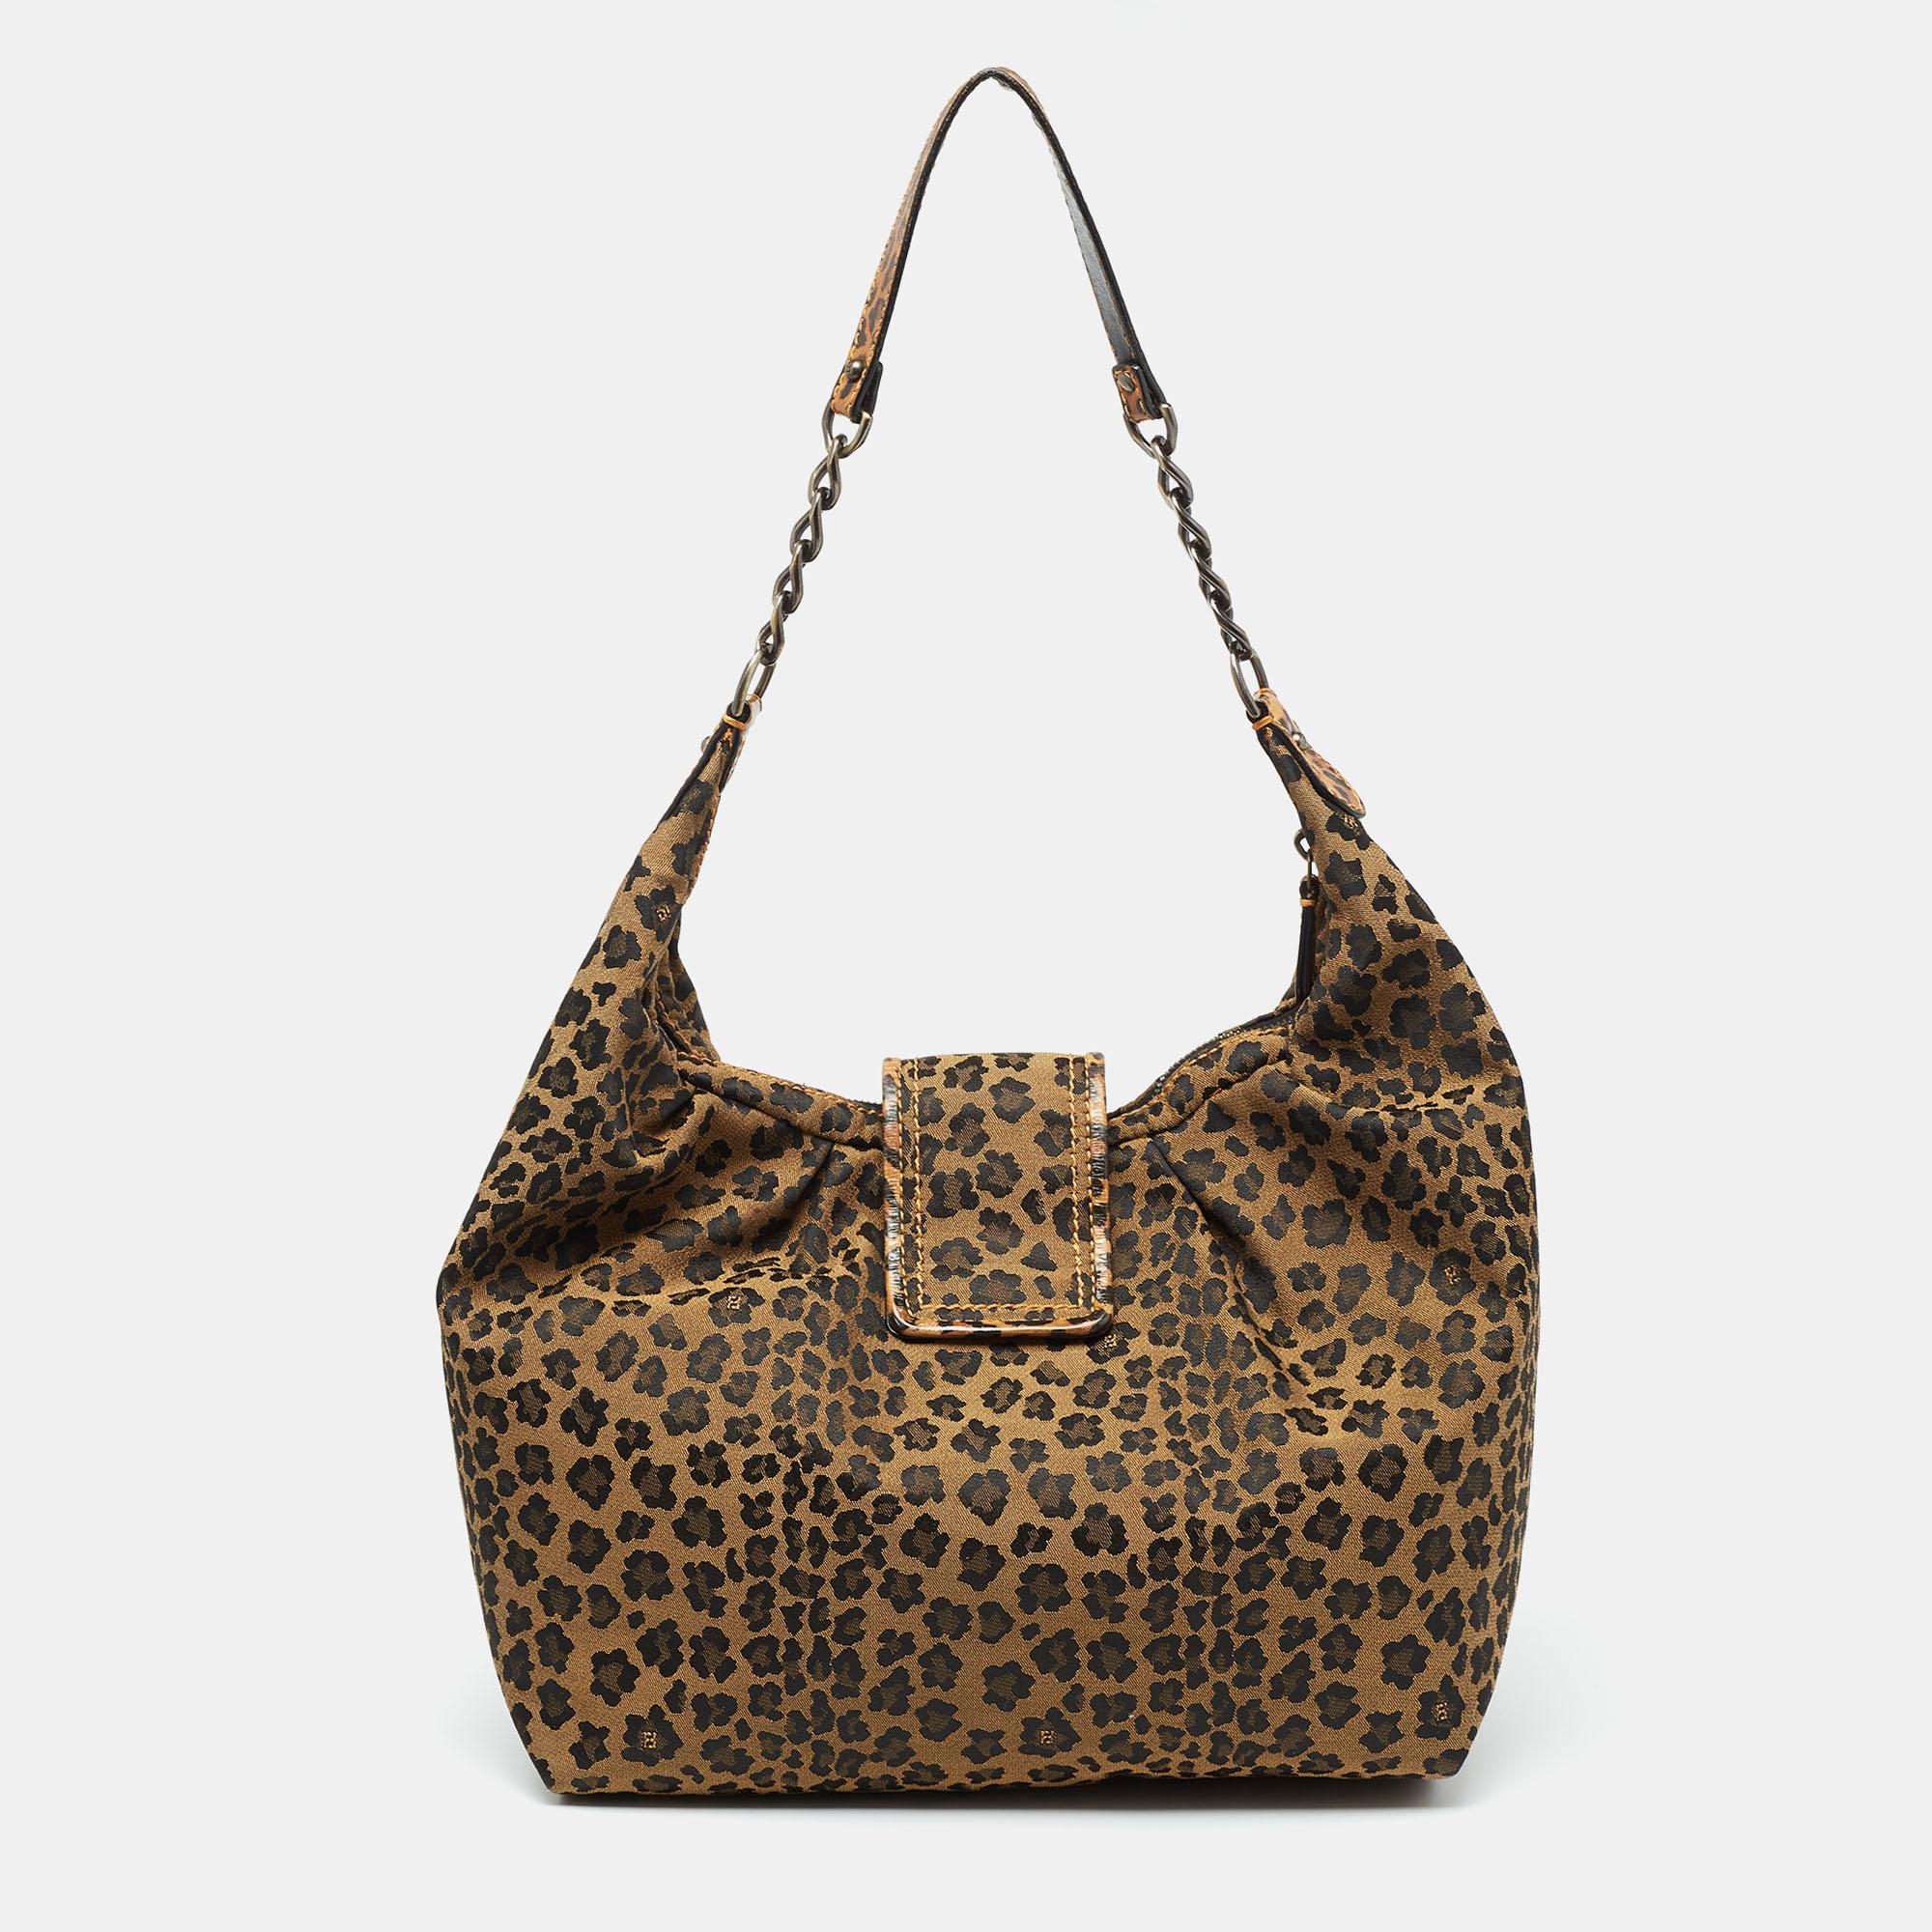 Decorated with animal print, this Fendi hobo is a must-have. Created from canvas, it displays a chain-leather shoulder strap, a distinct buckle closure at the front, and brass-tone hardware. The roomy fabric-lined interior offers it a practical